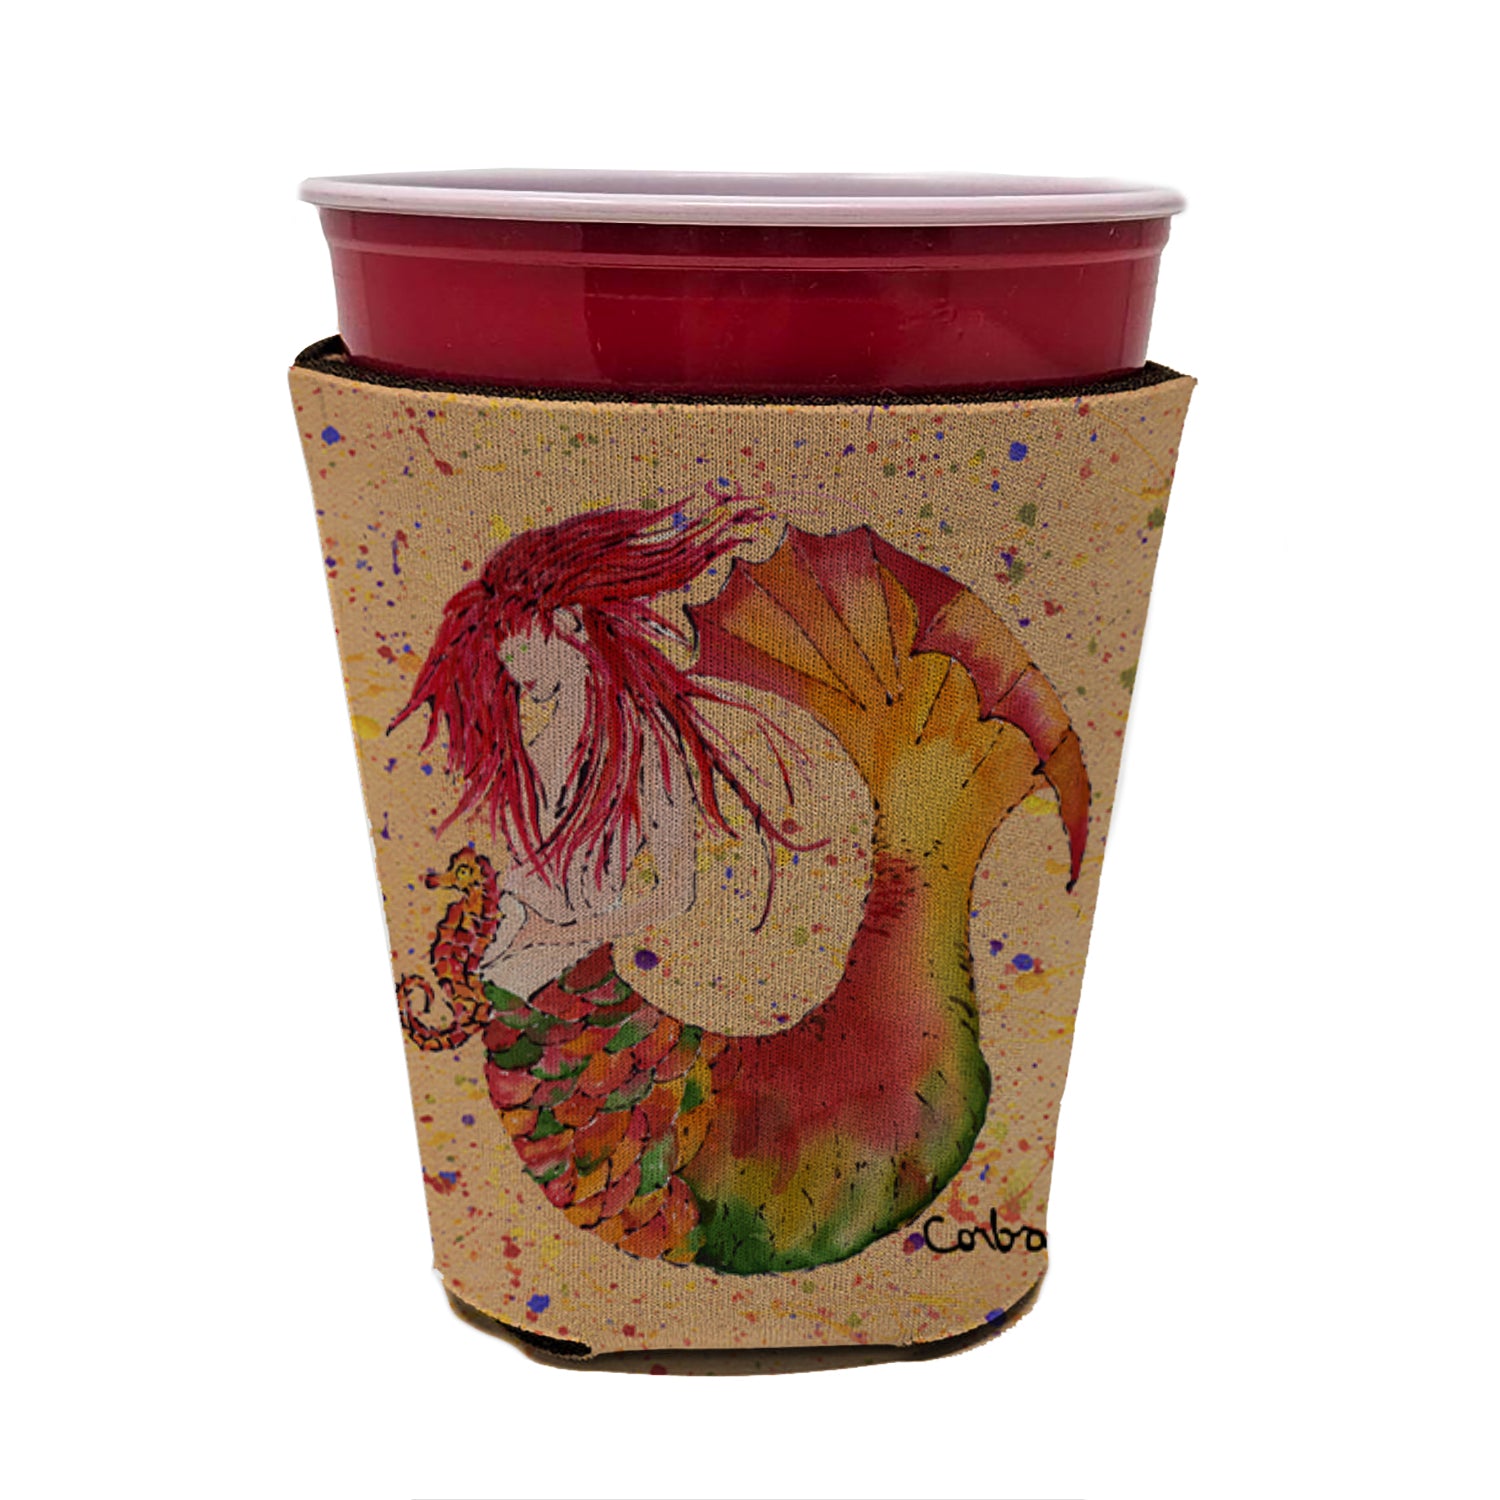 Sirène Red Headed Mermaid Red Solo Cup Beverage Insulator Hugger